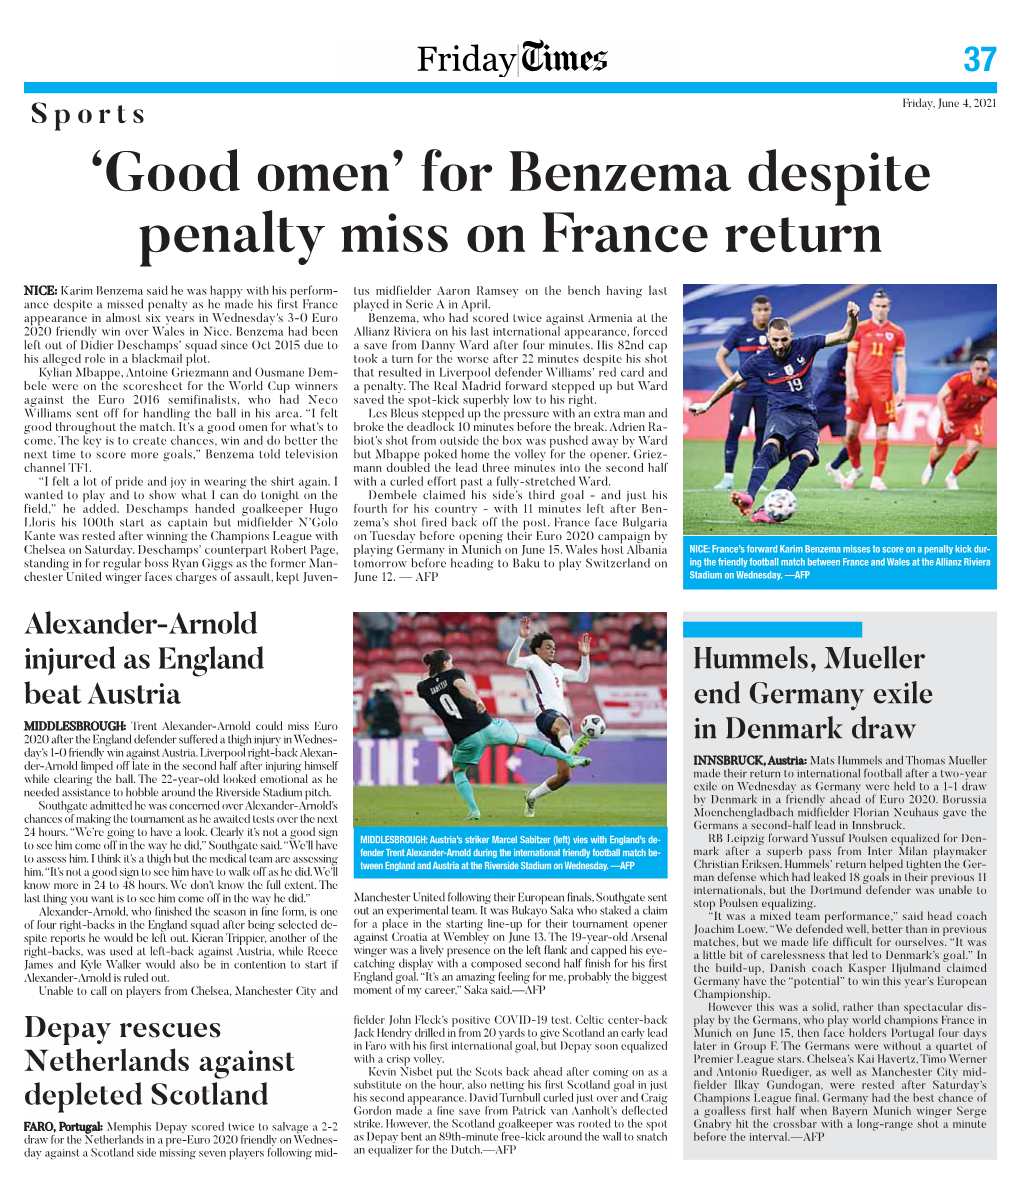 For Benzema Despite Penalty Miss on France Return